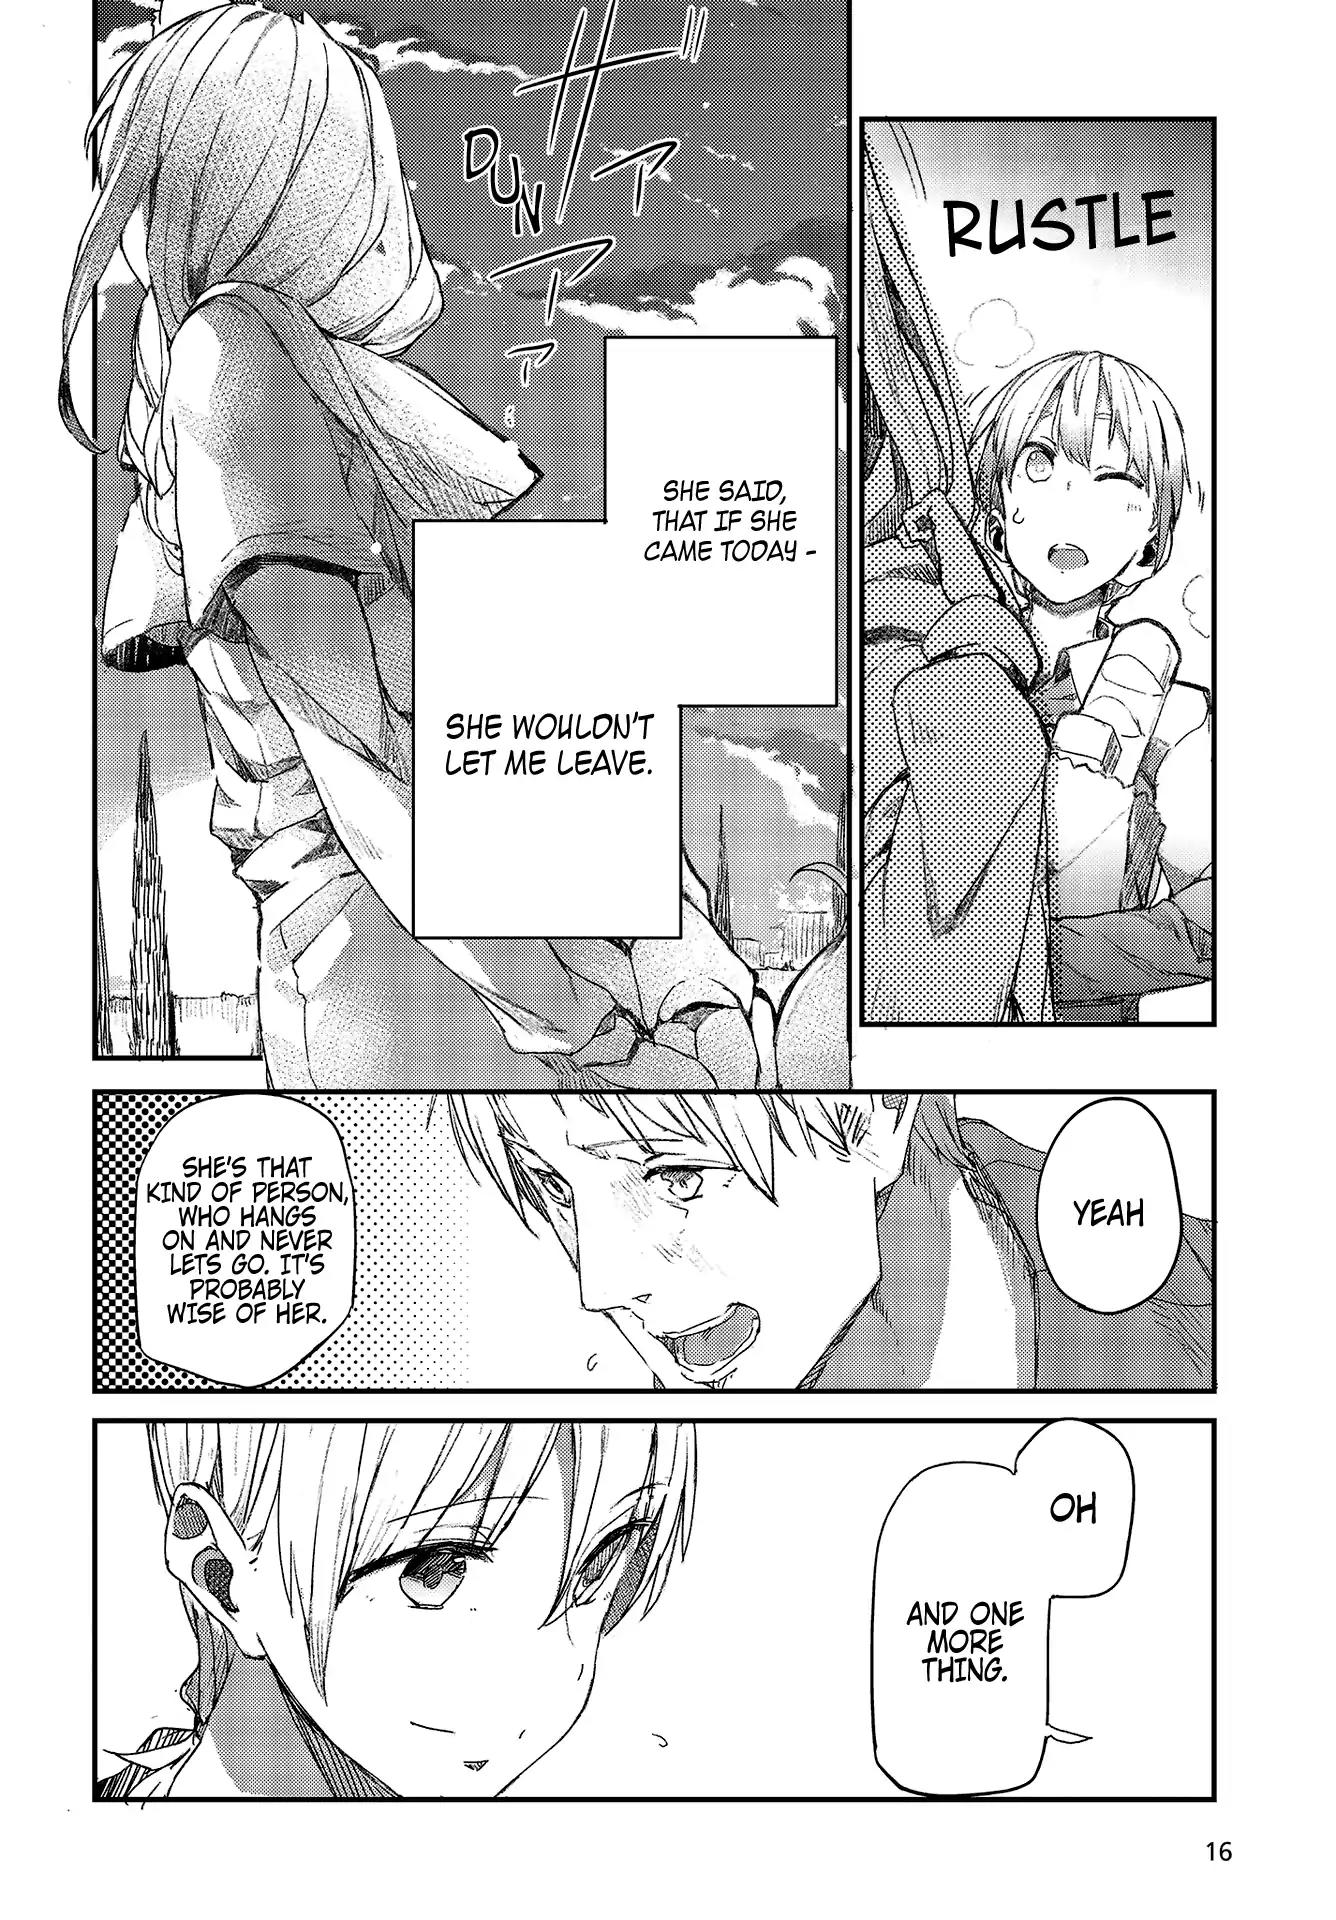 Wolf & Parchment: New Theory Spice & Wolf Vol.1 Chapter 1